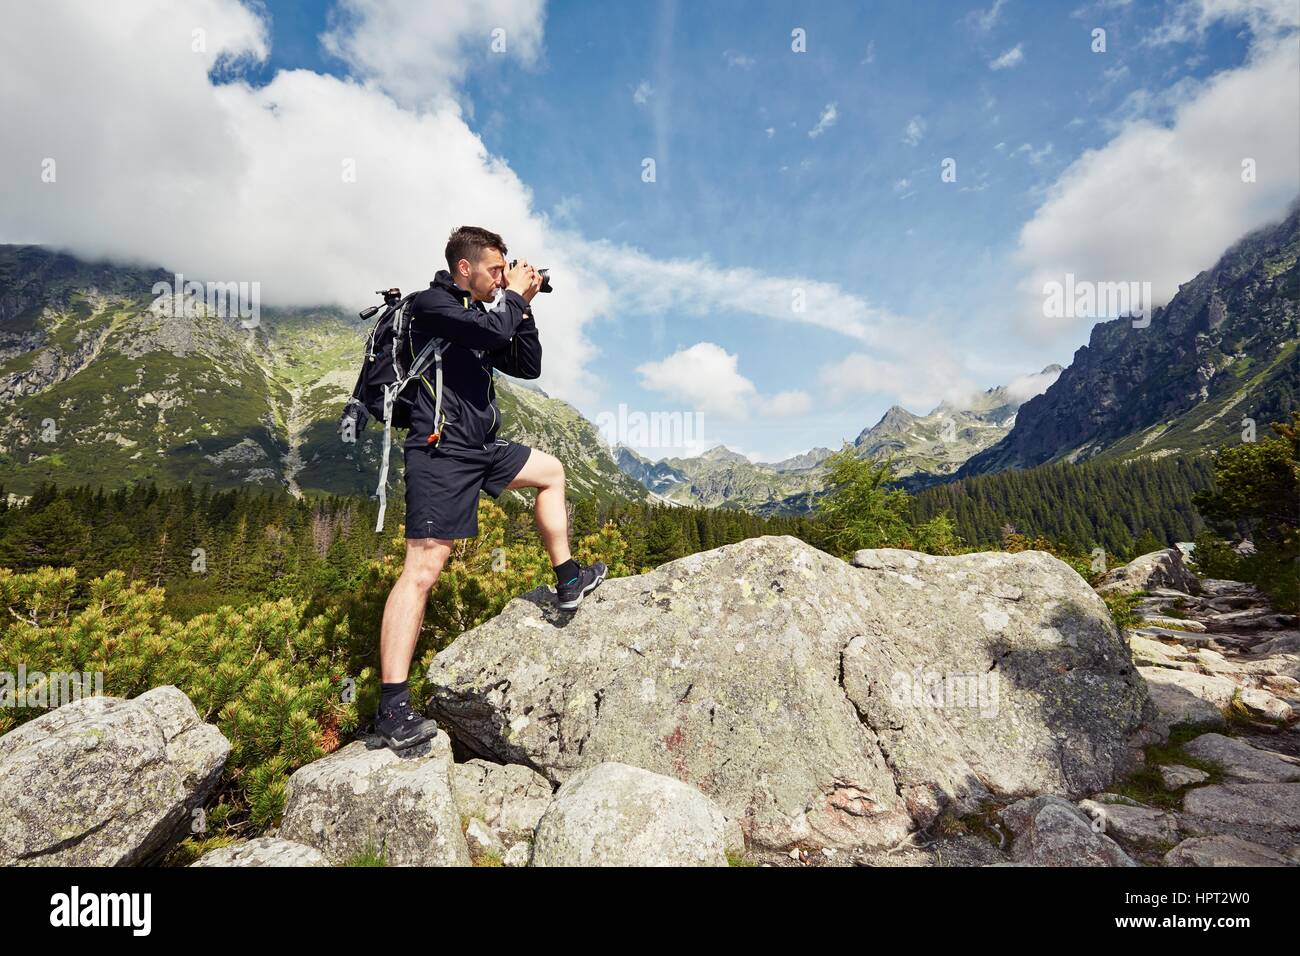 Trip of young photographer in the mountains Stock Photo